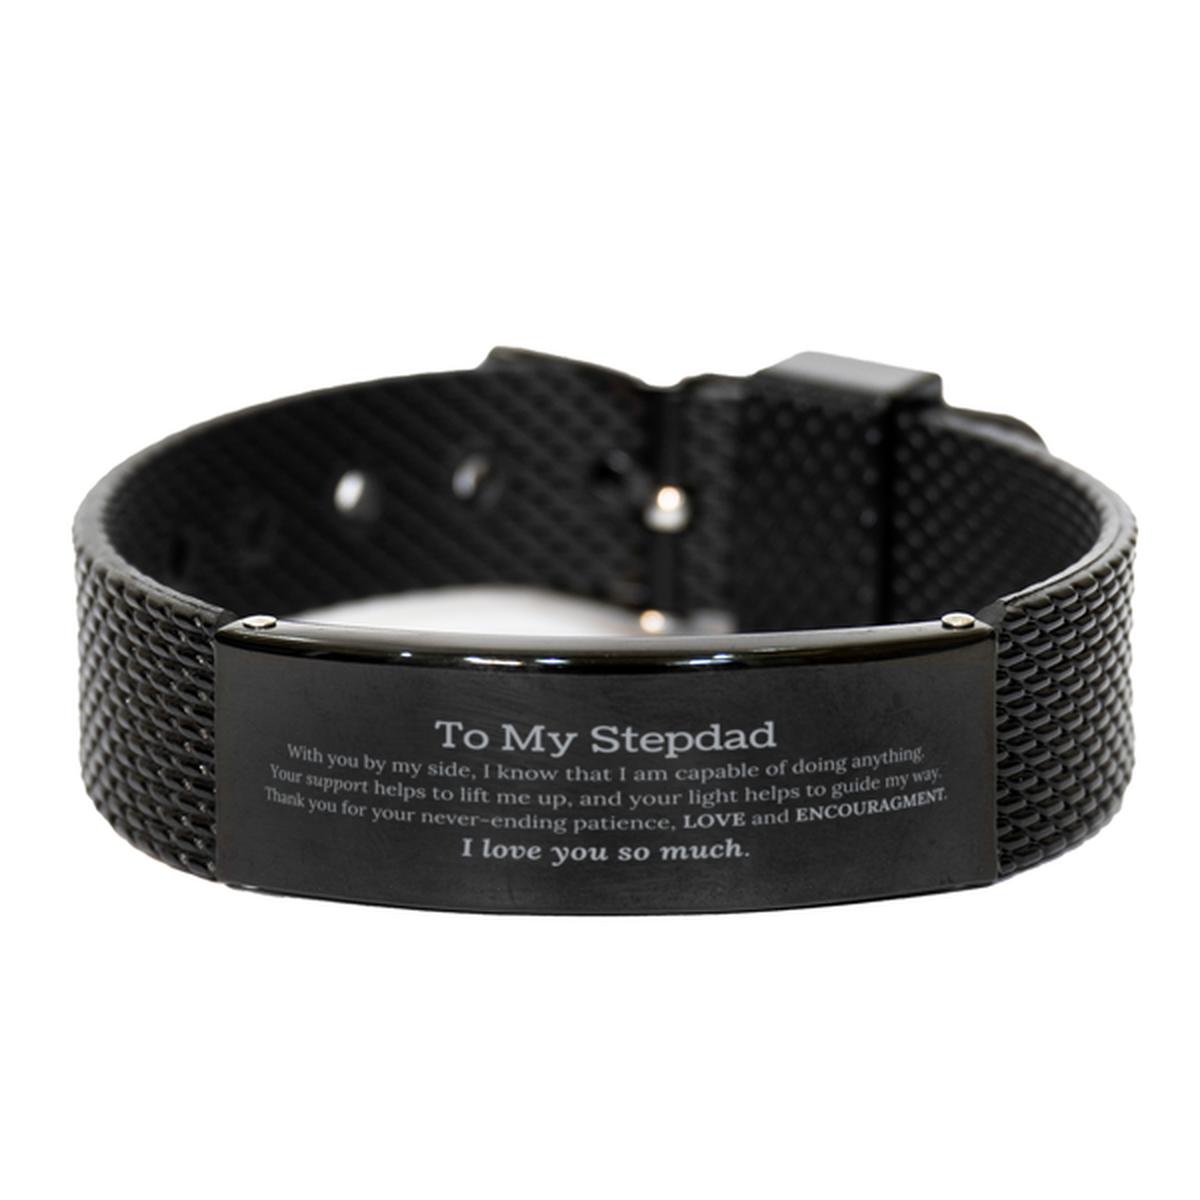 Appreciation Stepdad Black Shark Mesh Bracelet Gifts, To My Stepdad Birthday Christmas Wedding Keepsake Gifts for Stepdad With you by my side, I know that I am capable of doing anything. I love you so much